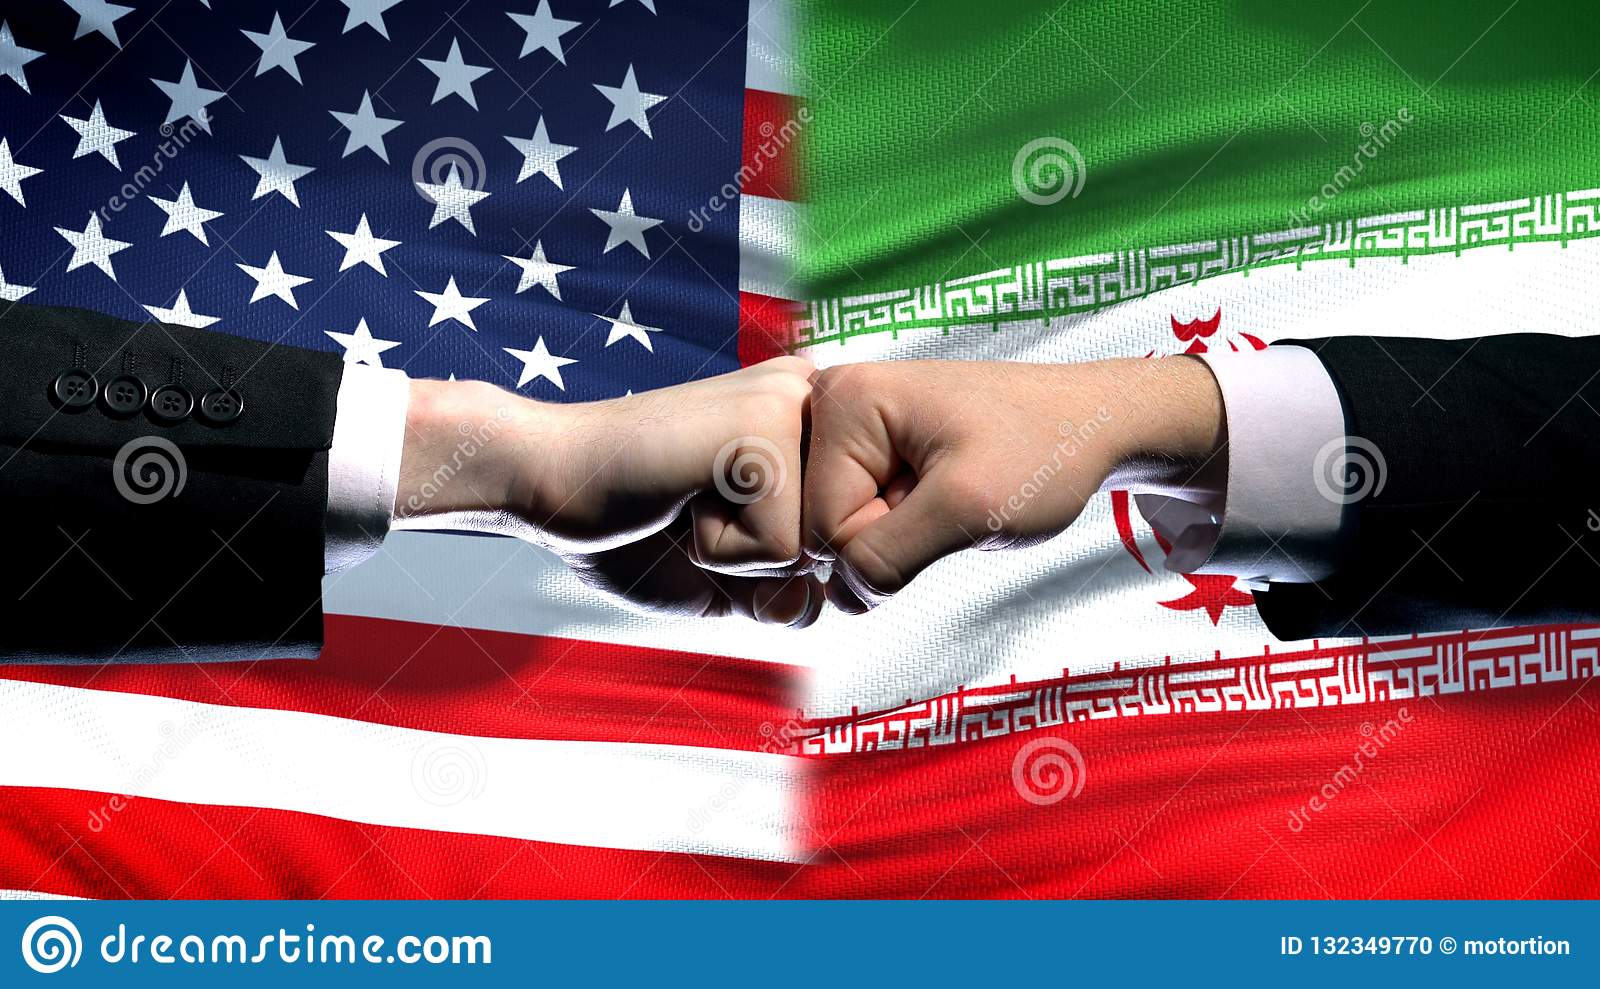 US Vs Iran Conflict, International Relations Crisis, Fists On Flag ...